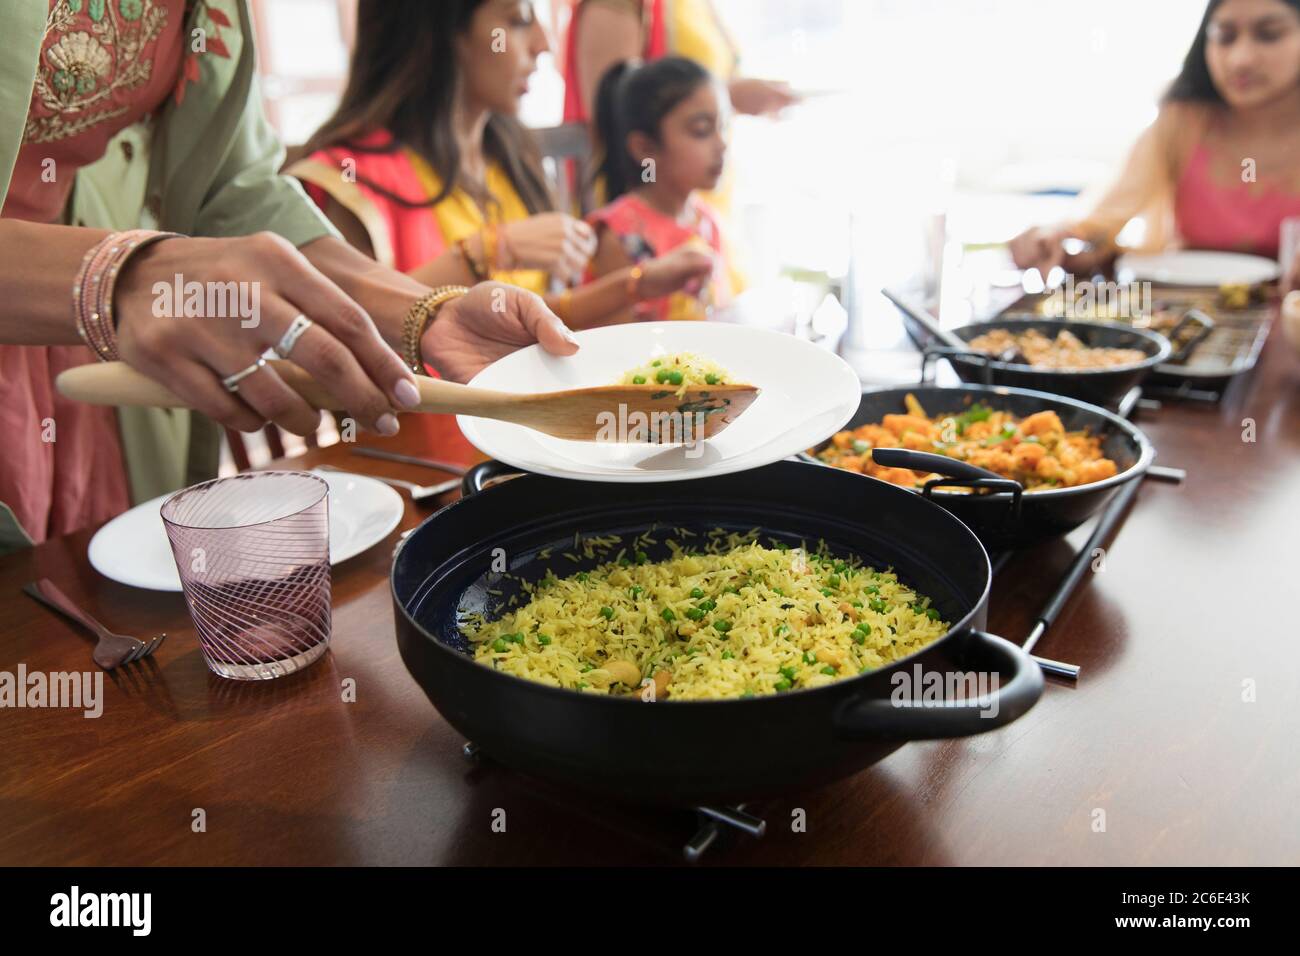 Indian women in saris serving and eating food at table Stock Photo